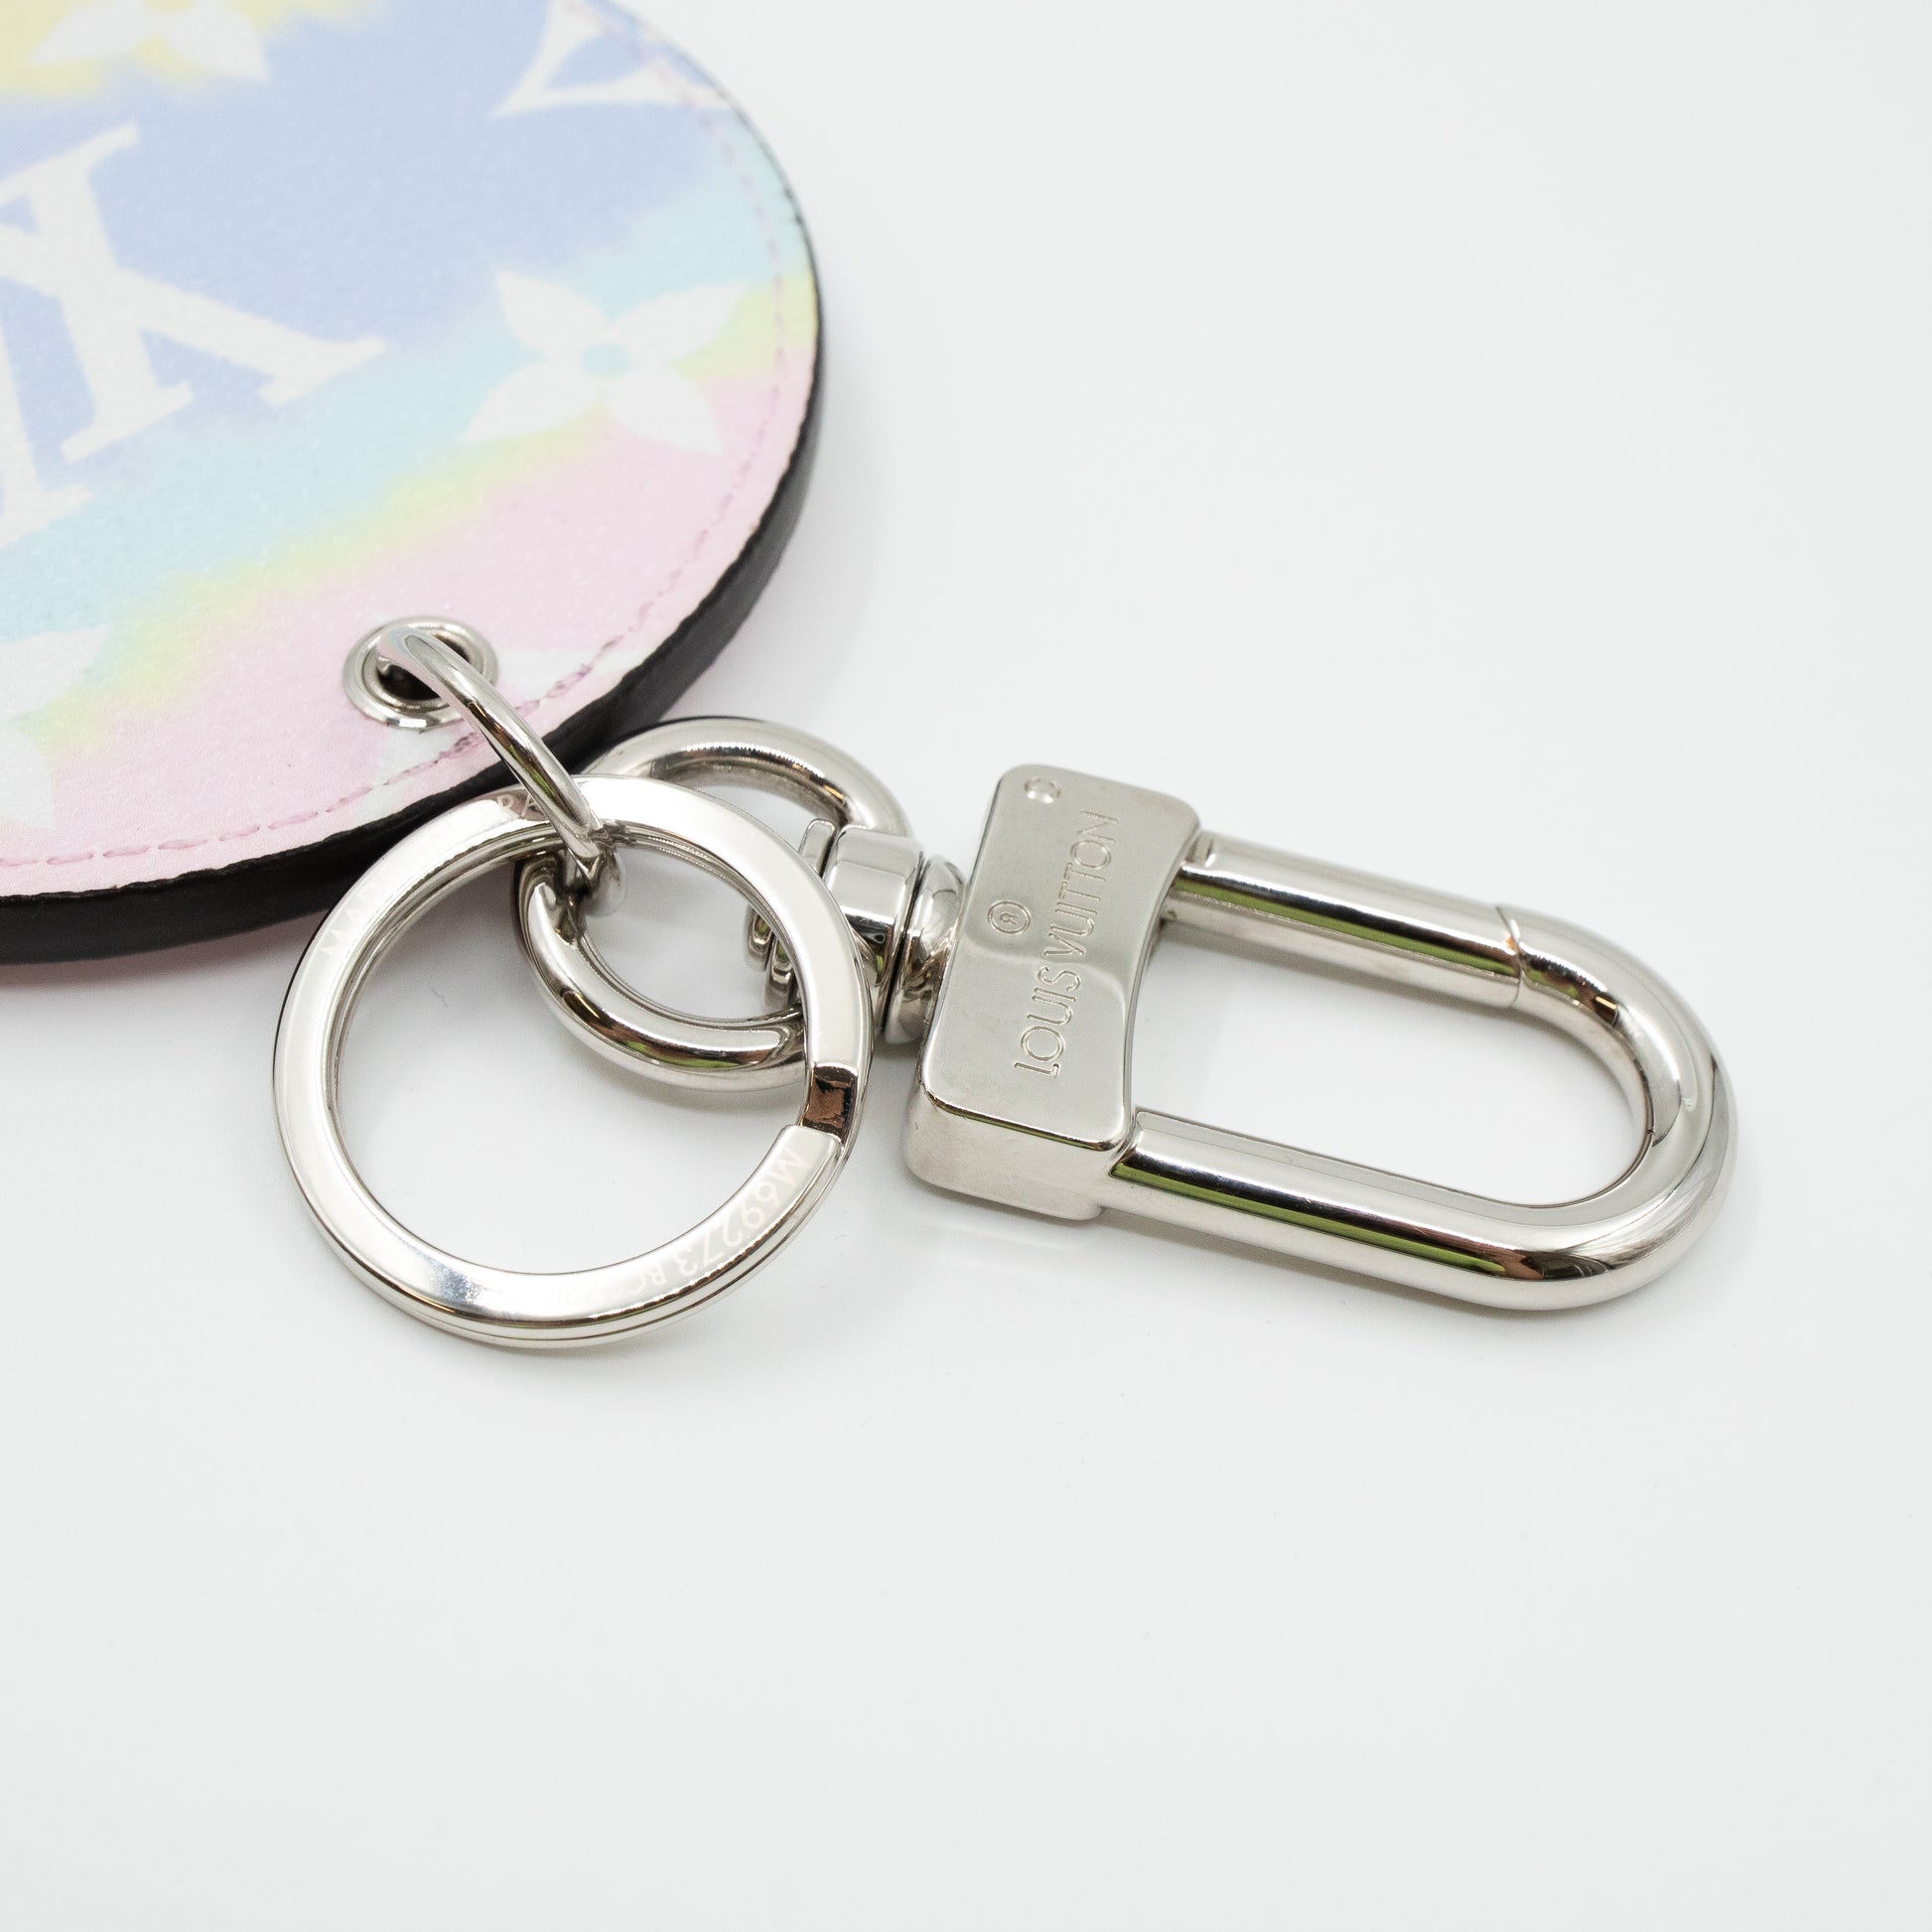 Louis Vuitton Escale Round Key Holder and Bag Charm